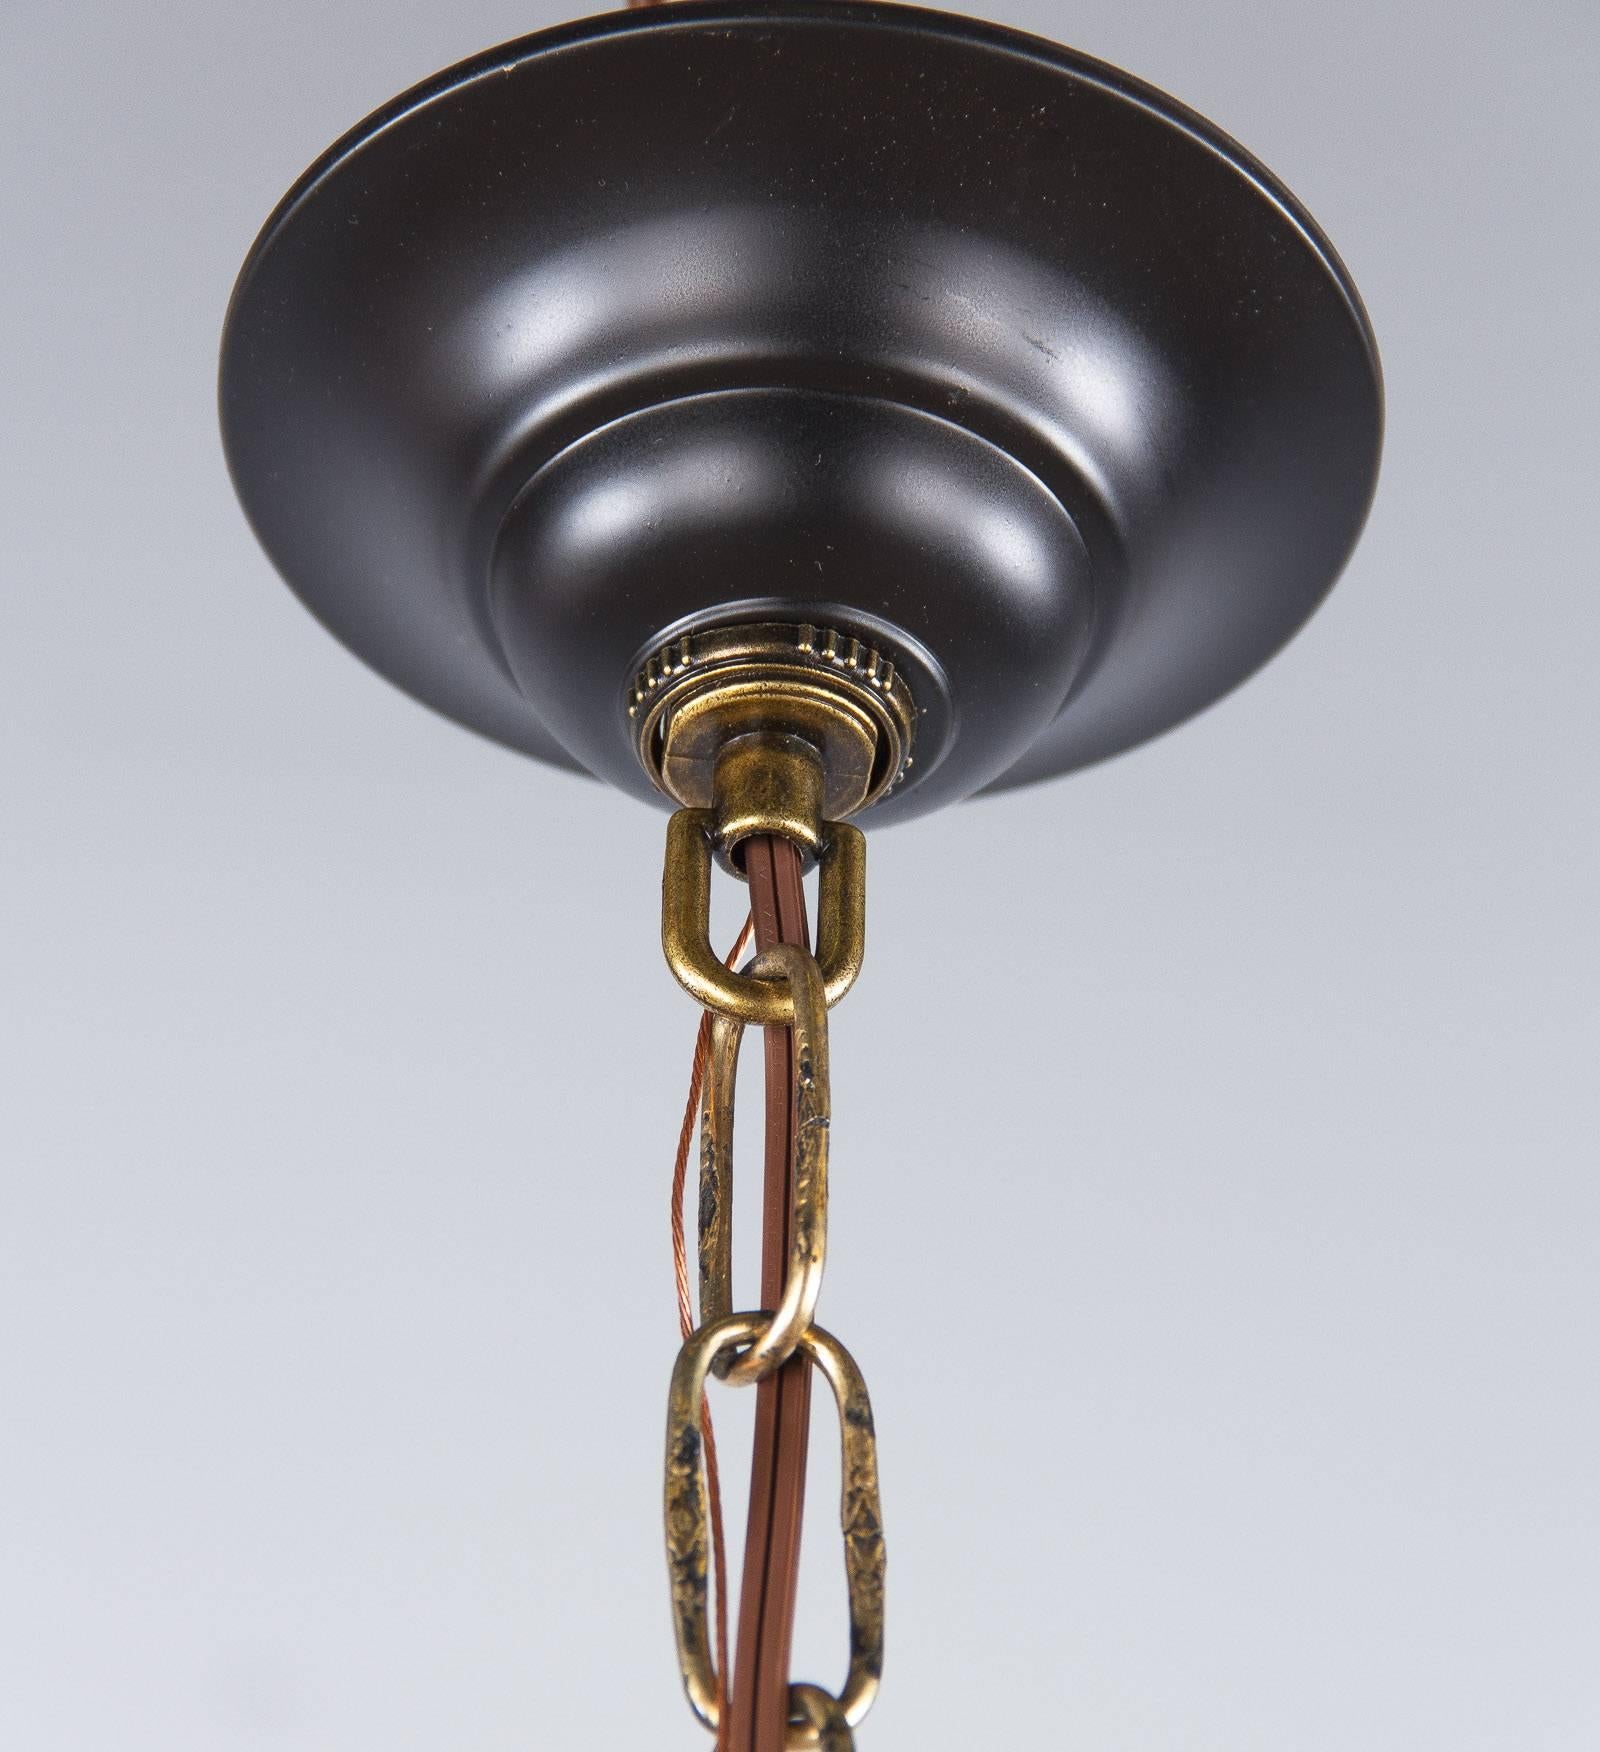 20th Century Italian Painted Wood and Metal Chandelier, 1920s-1940s